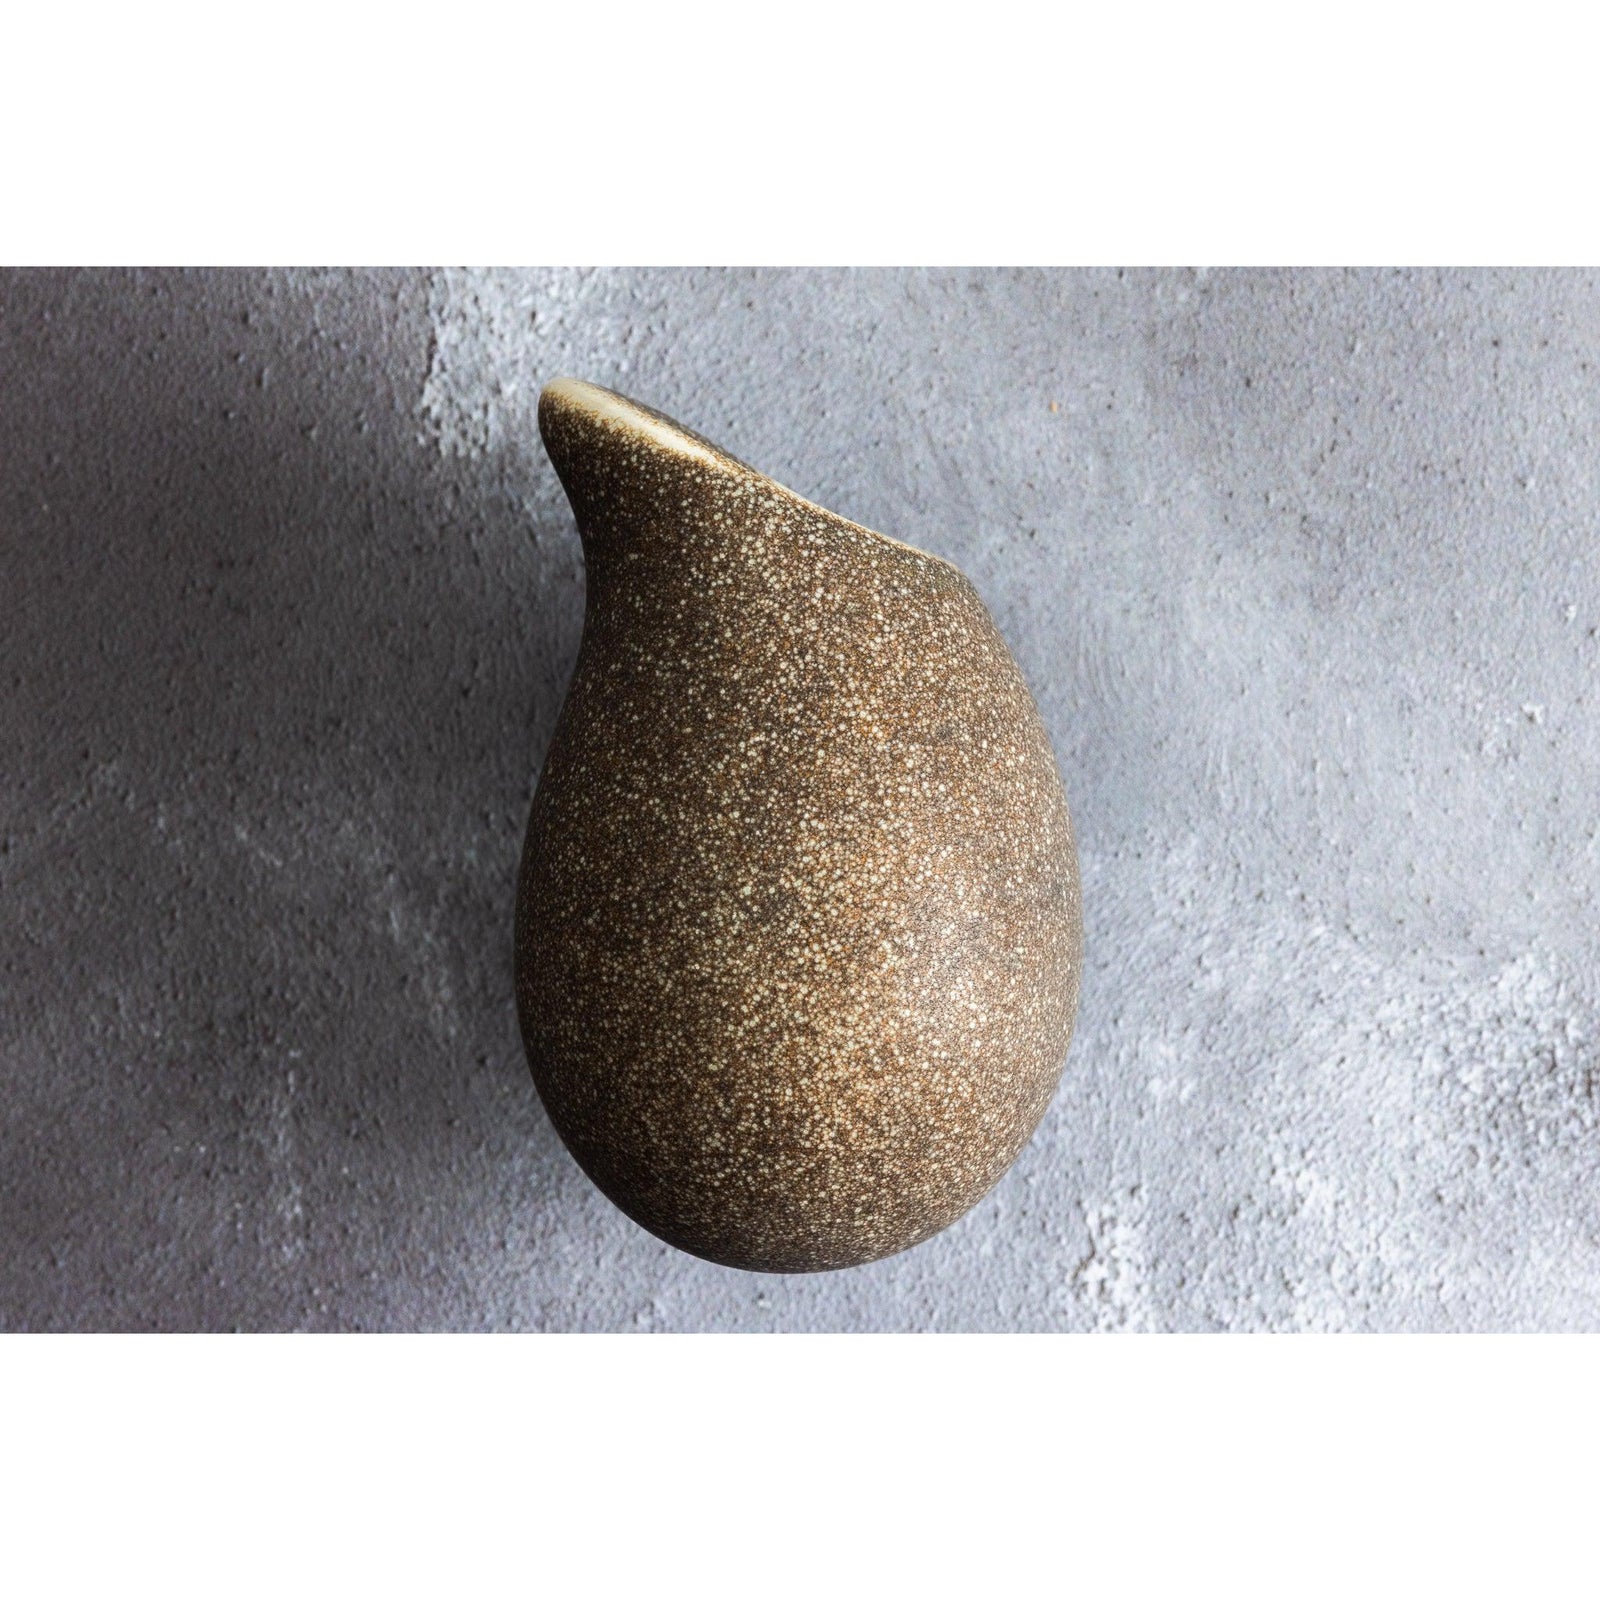 KSR2 Droplet Wall Vase by Kate Schuricht, available at Padstow Gallery, Cornwall